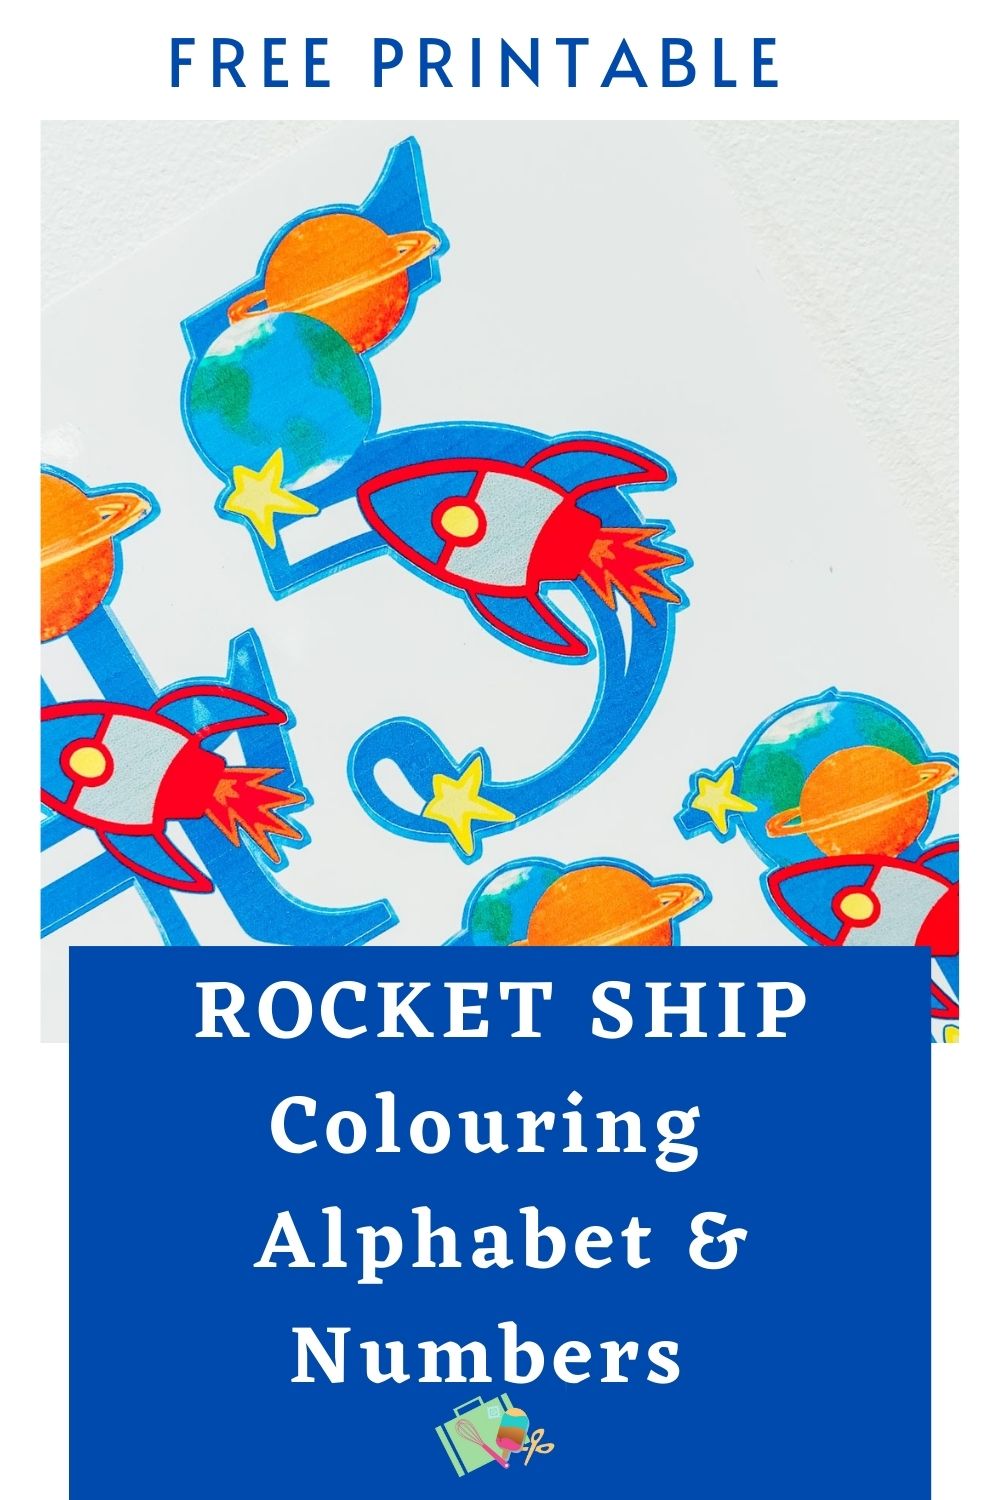 Free Printable ROCKET SHIP Alphabet and Numbers